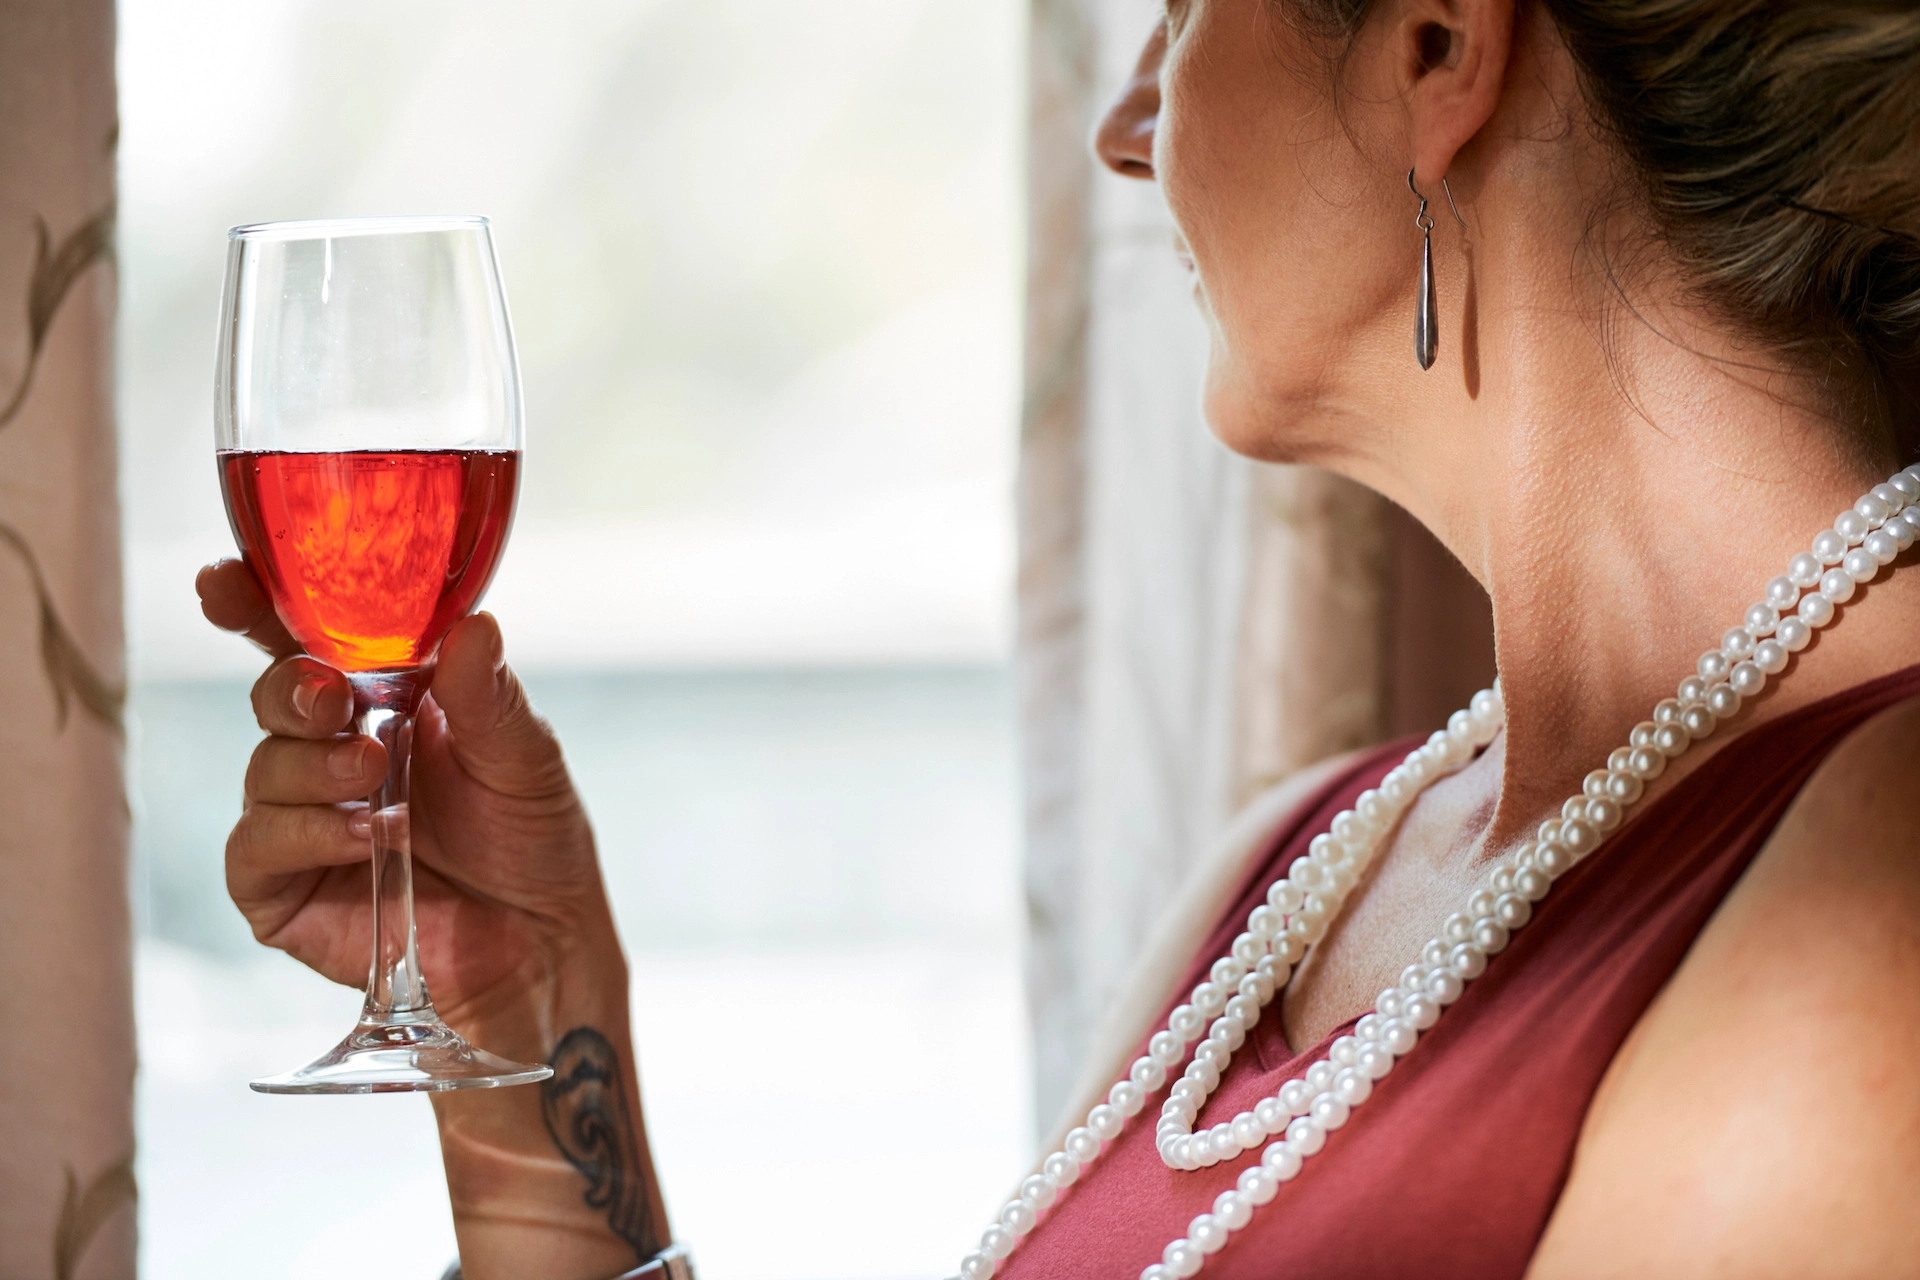 Drinking alcohol not likely to increase risk of a breast cancer recurrence